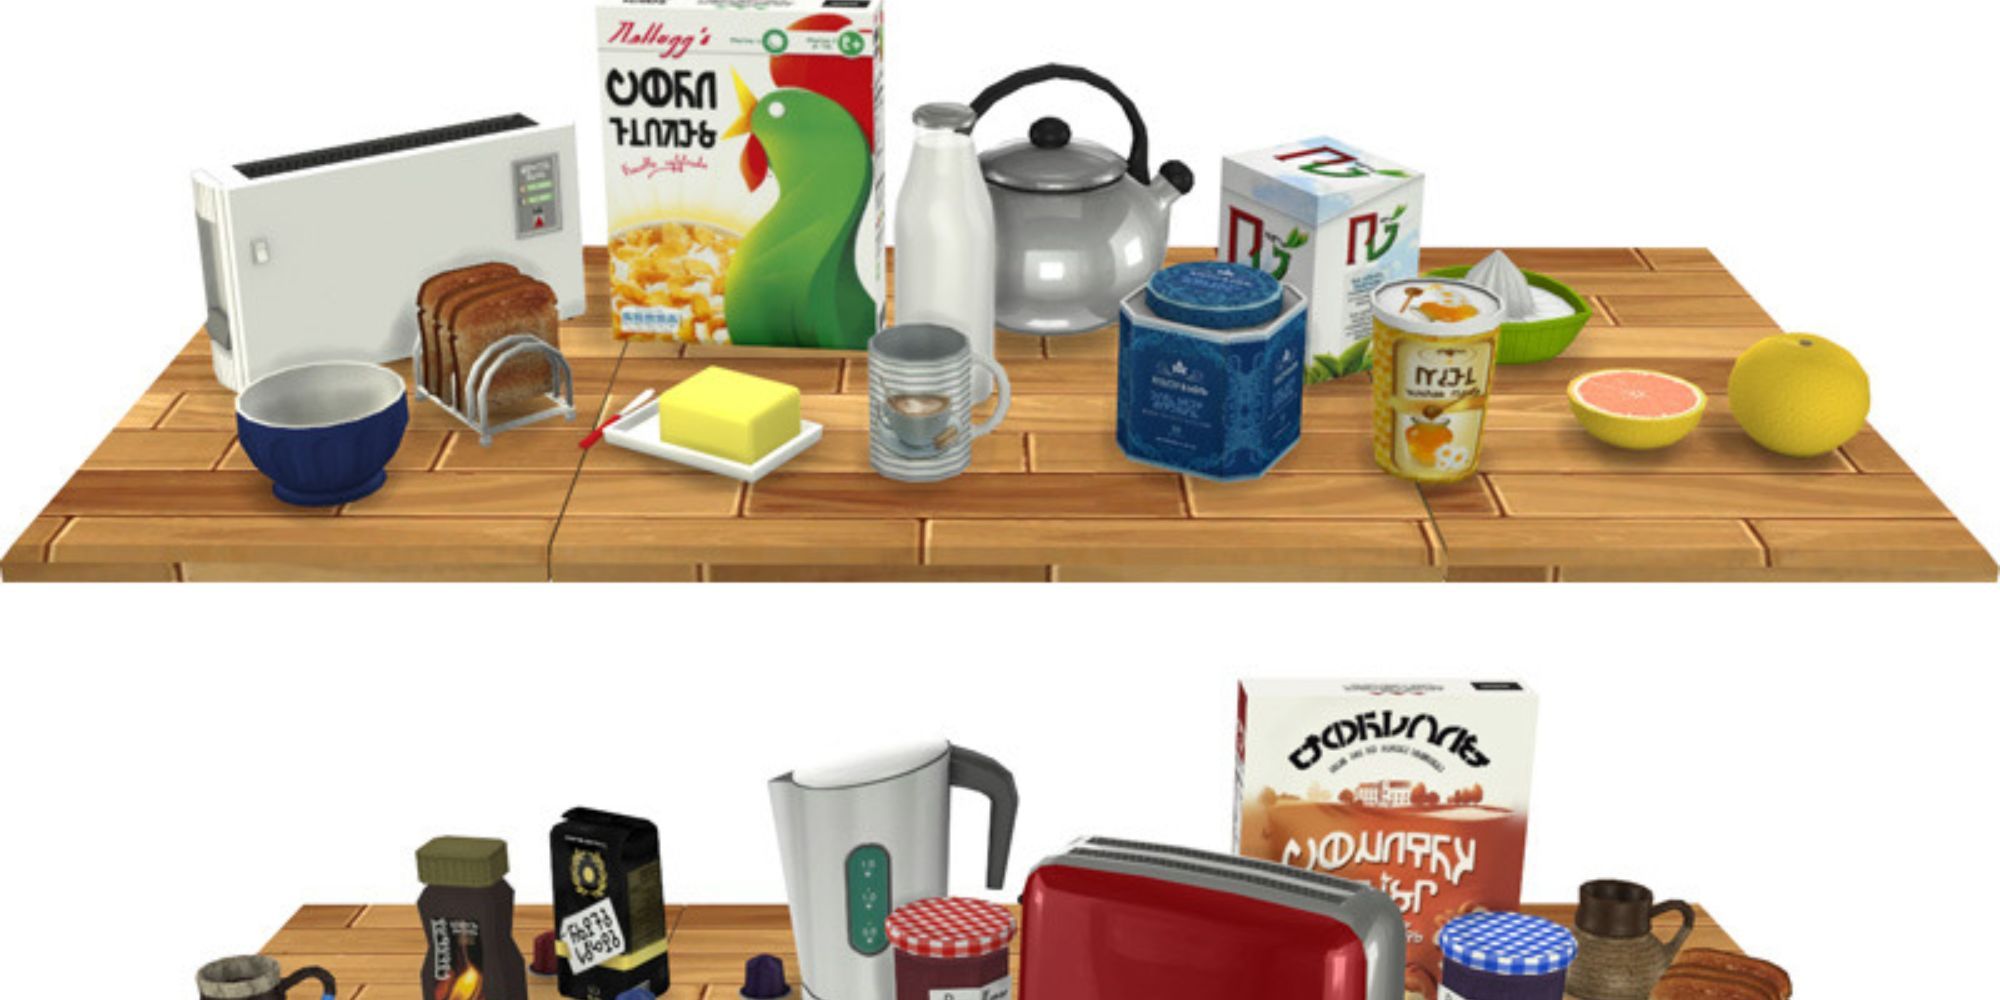 Breakfast clutter items for The Sims 4